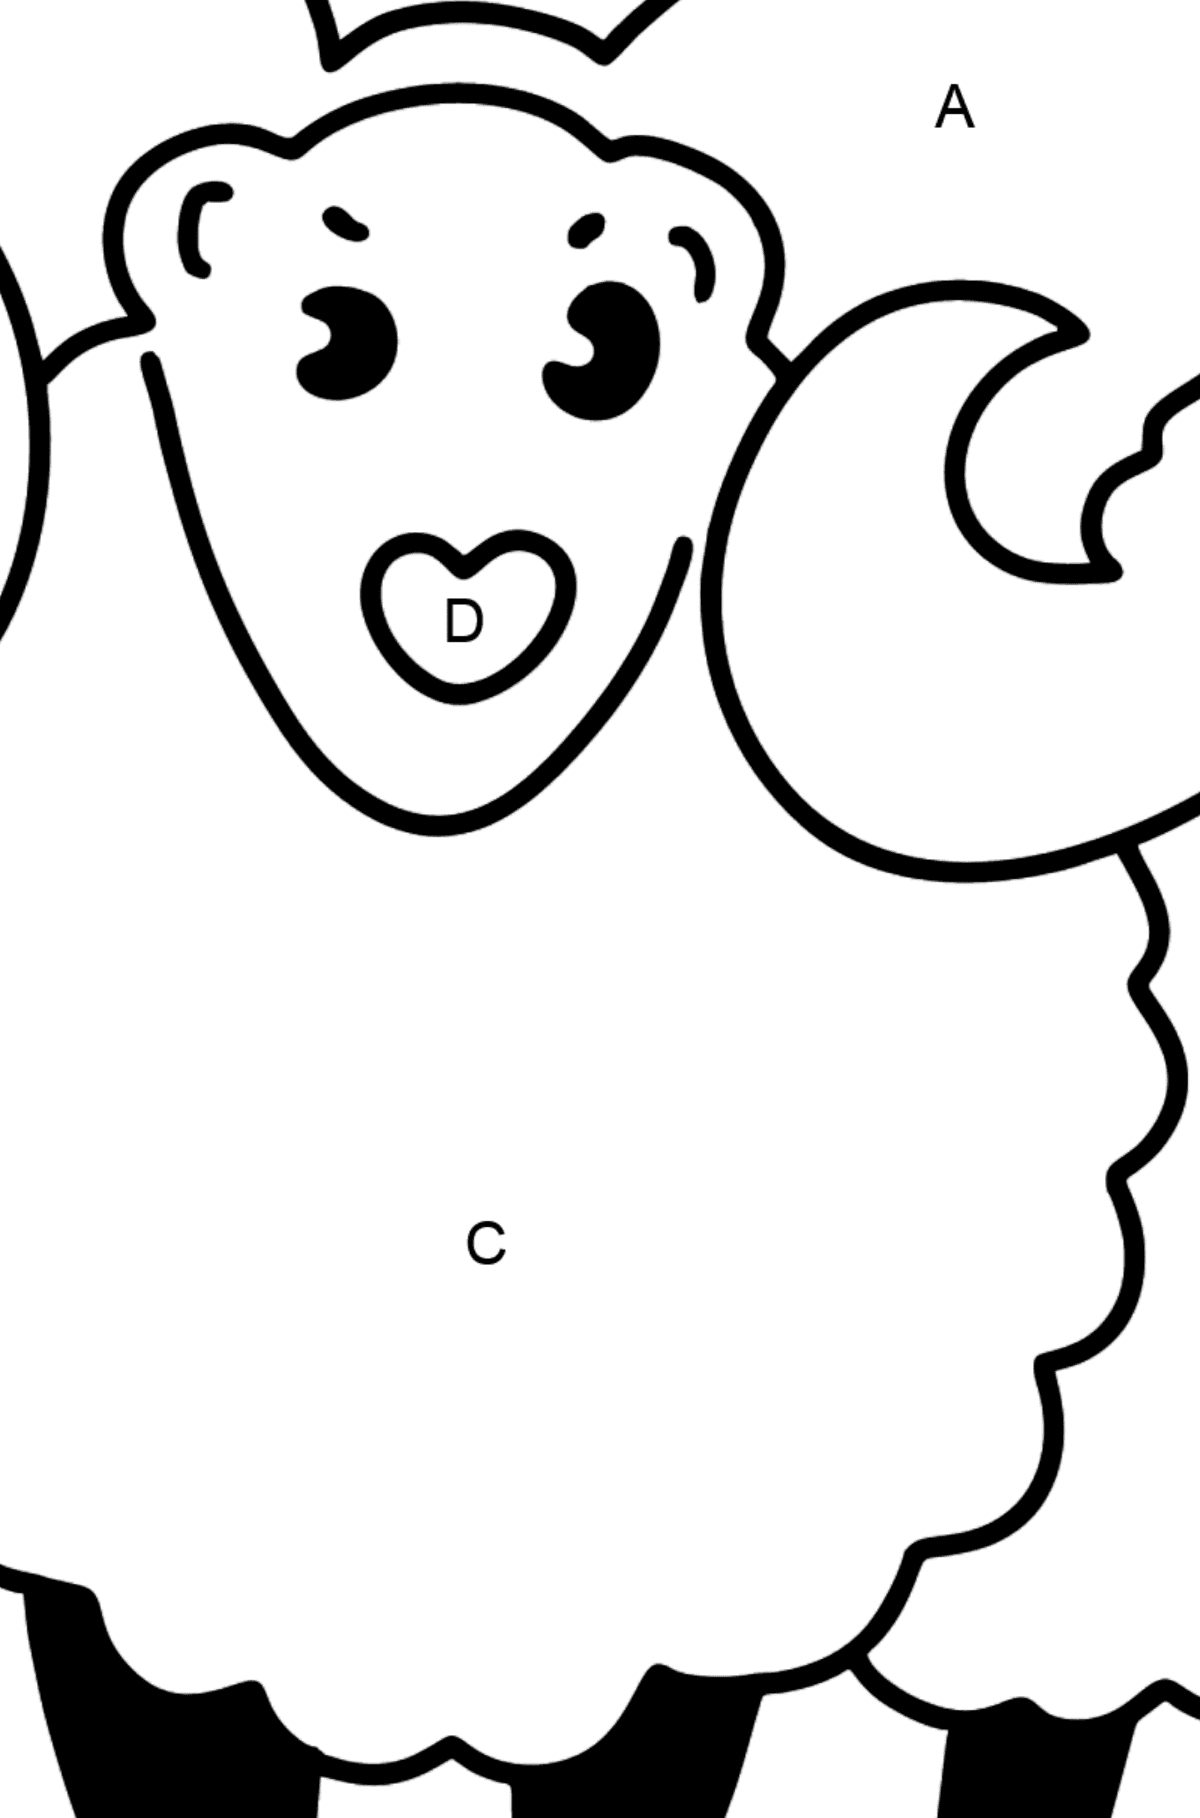 Home Lamb coloring page - Coloring by Letters for Kids